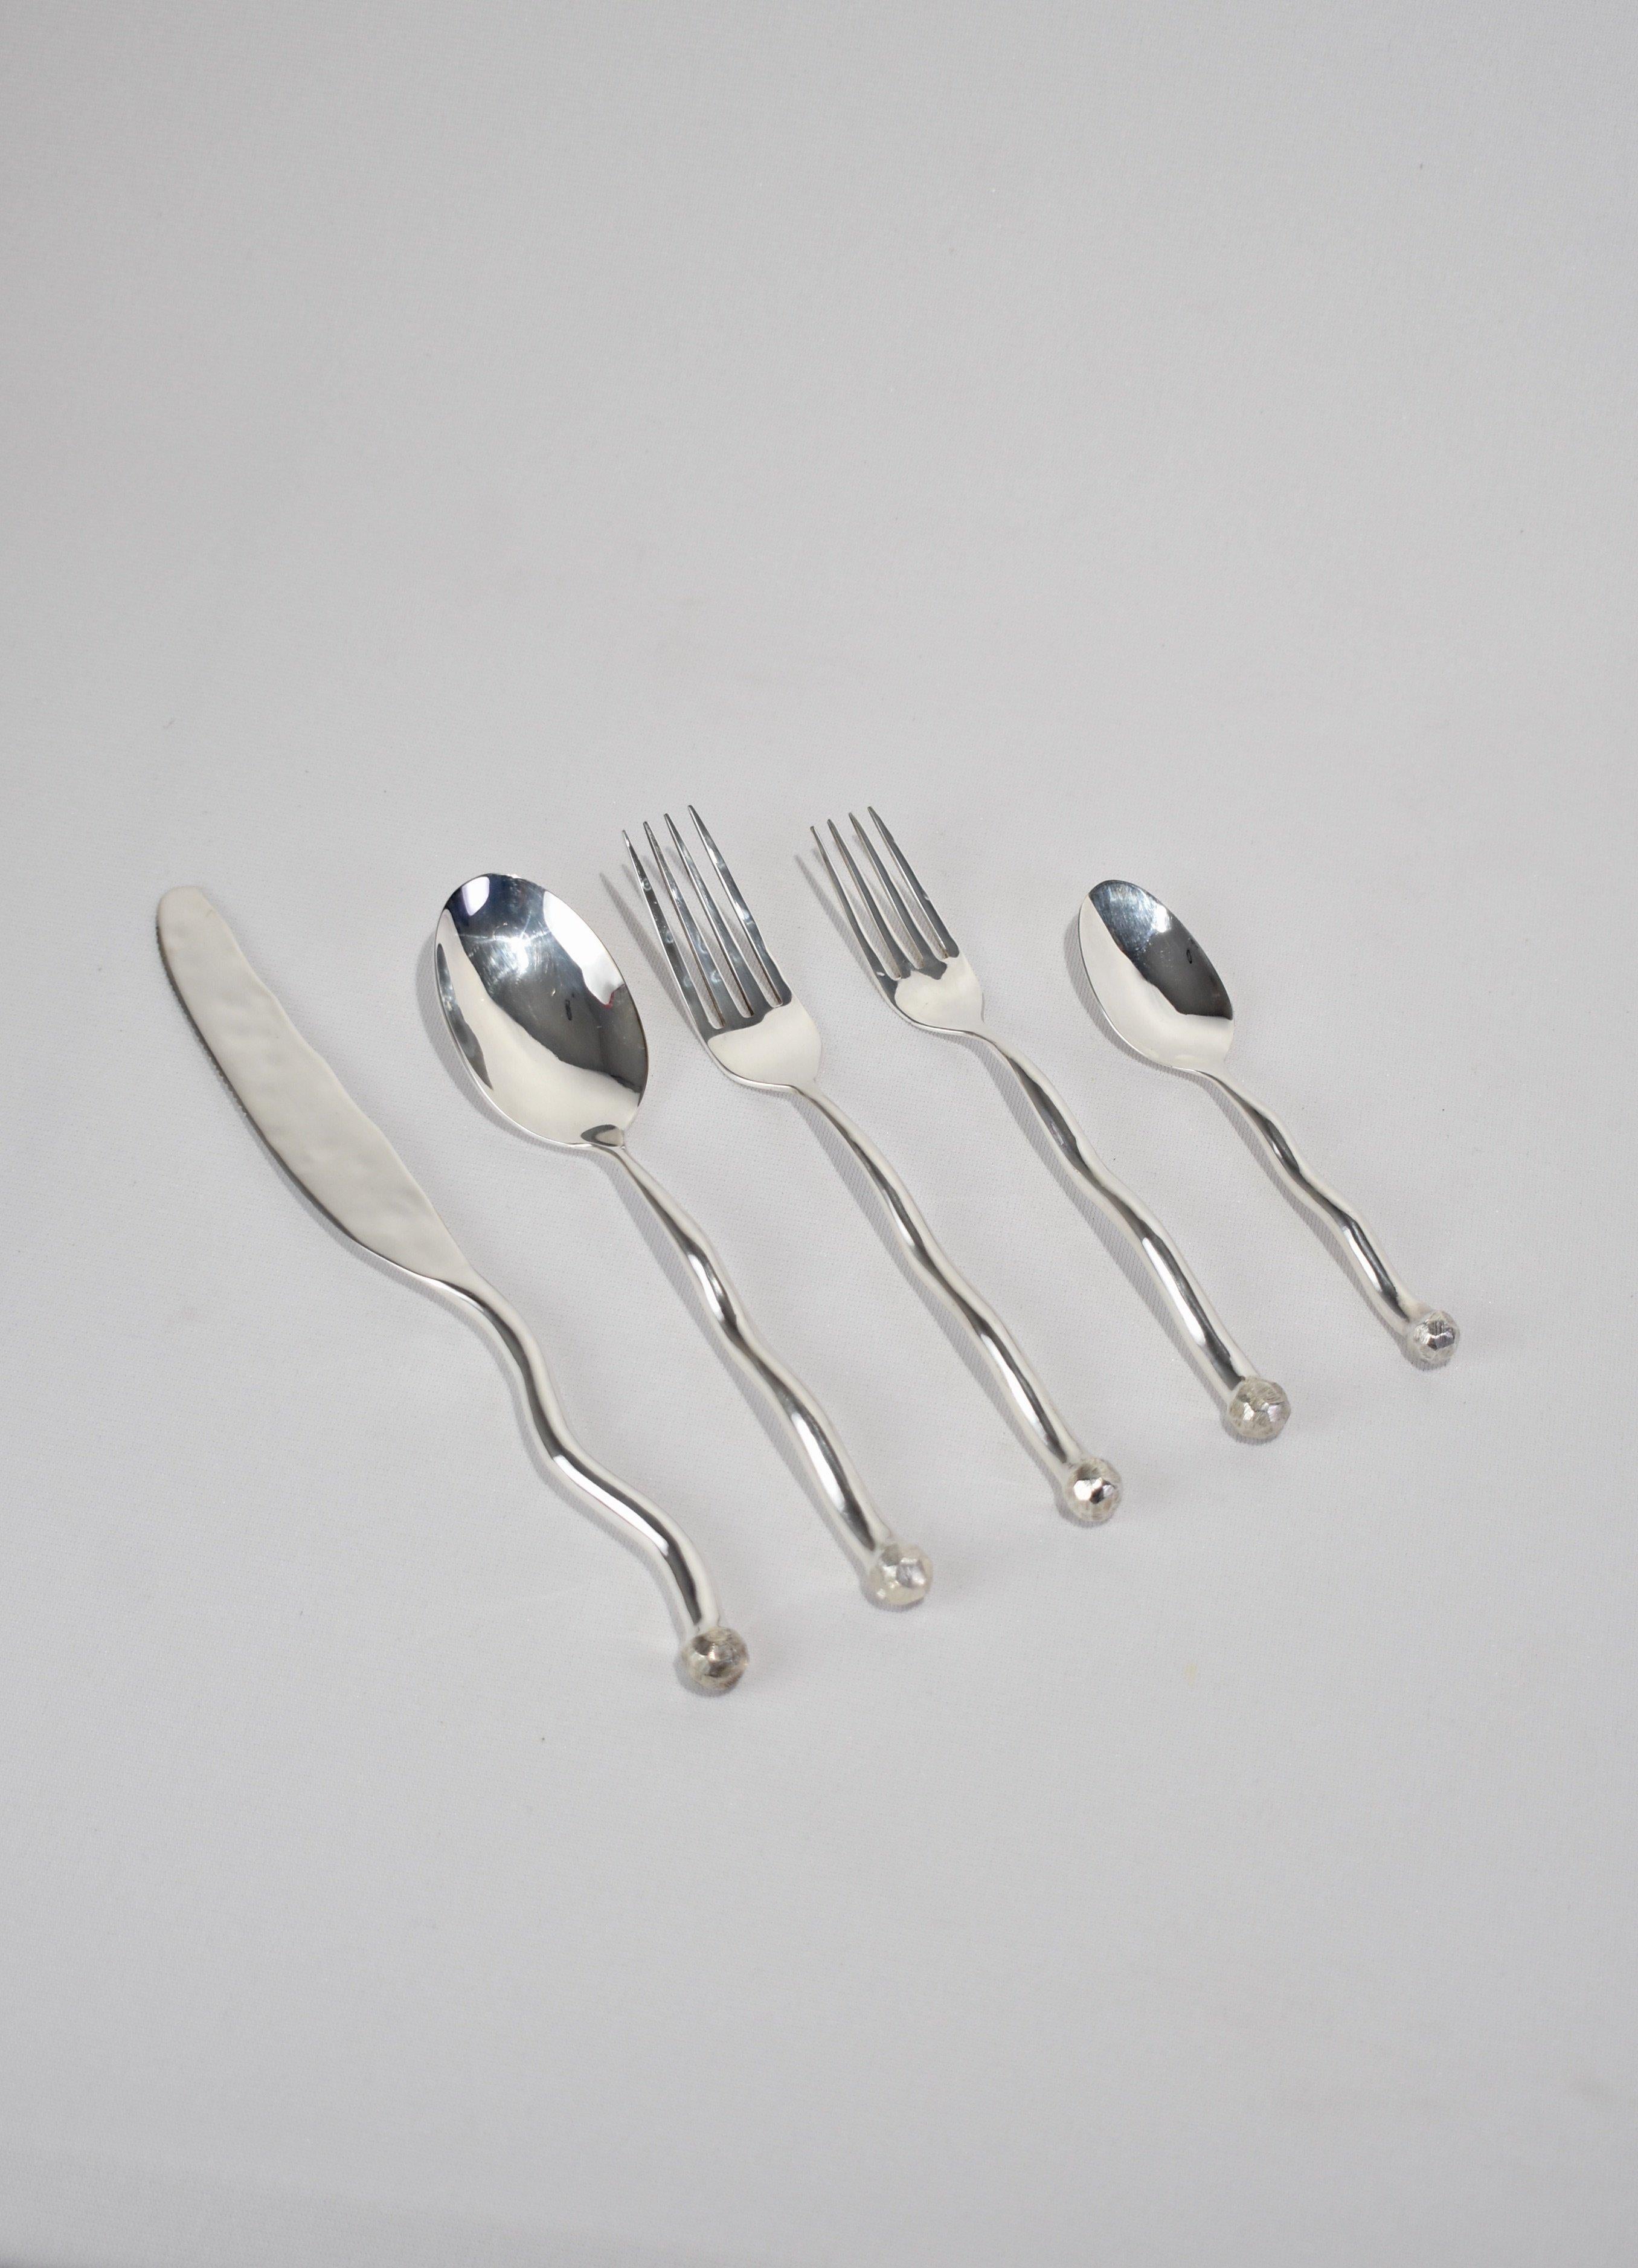 Beautiful, 5 piece silver plated flatware set in 'Sphere' pattern. Each piece features an undulating handle and hammered textured knob on end. Impressed above knob on underside of handle: 'IZABEL LAM'. 

Purchase includes one set of five